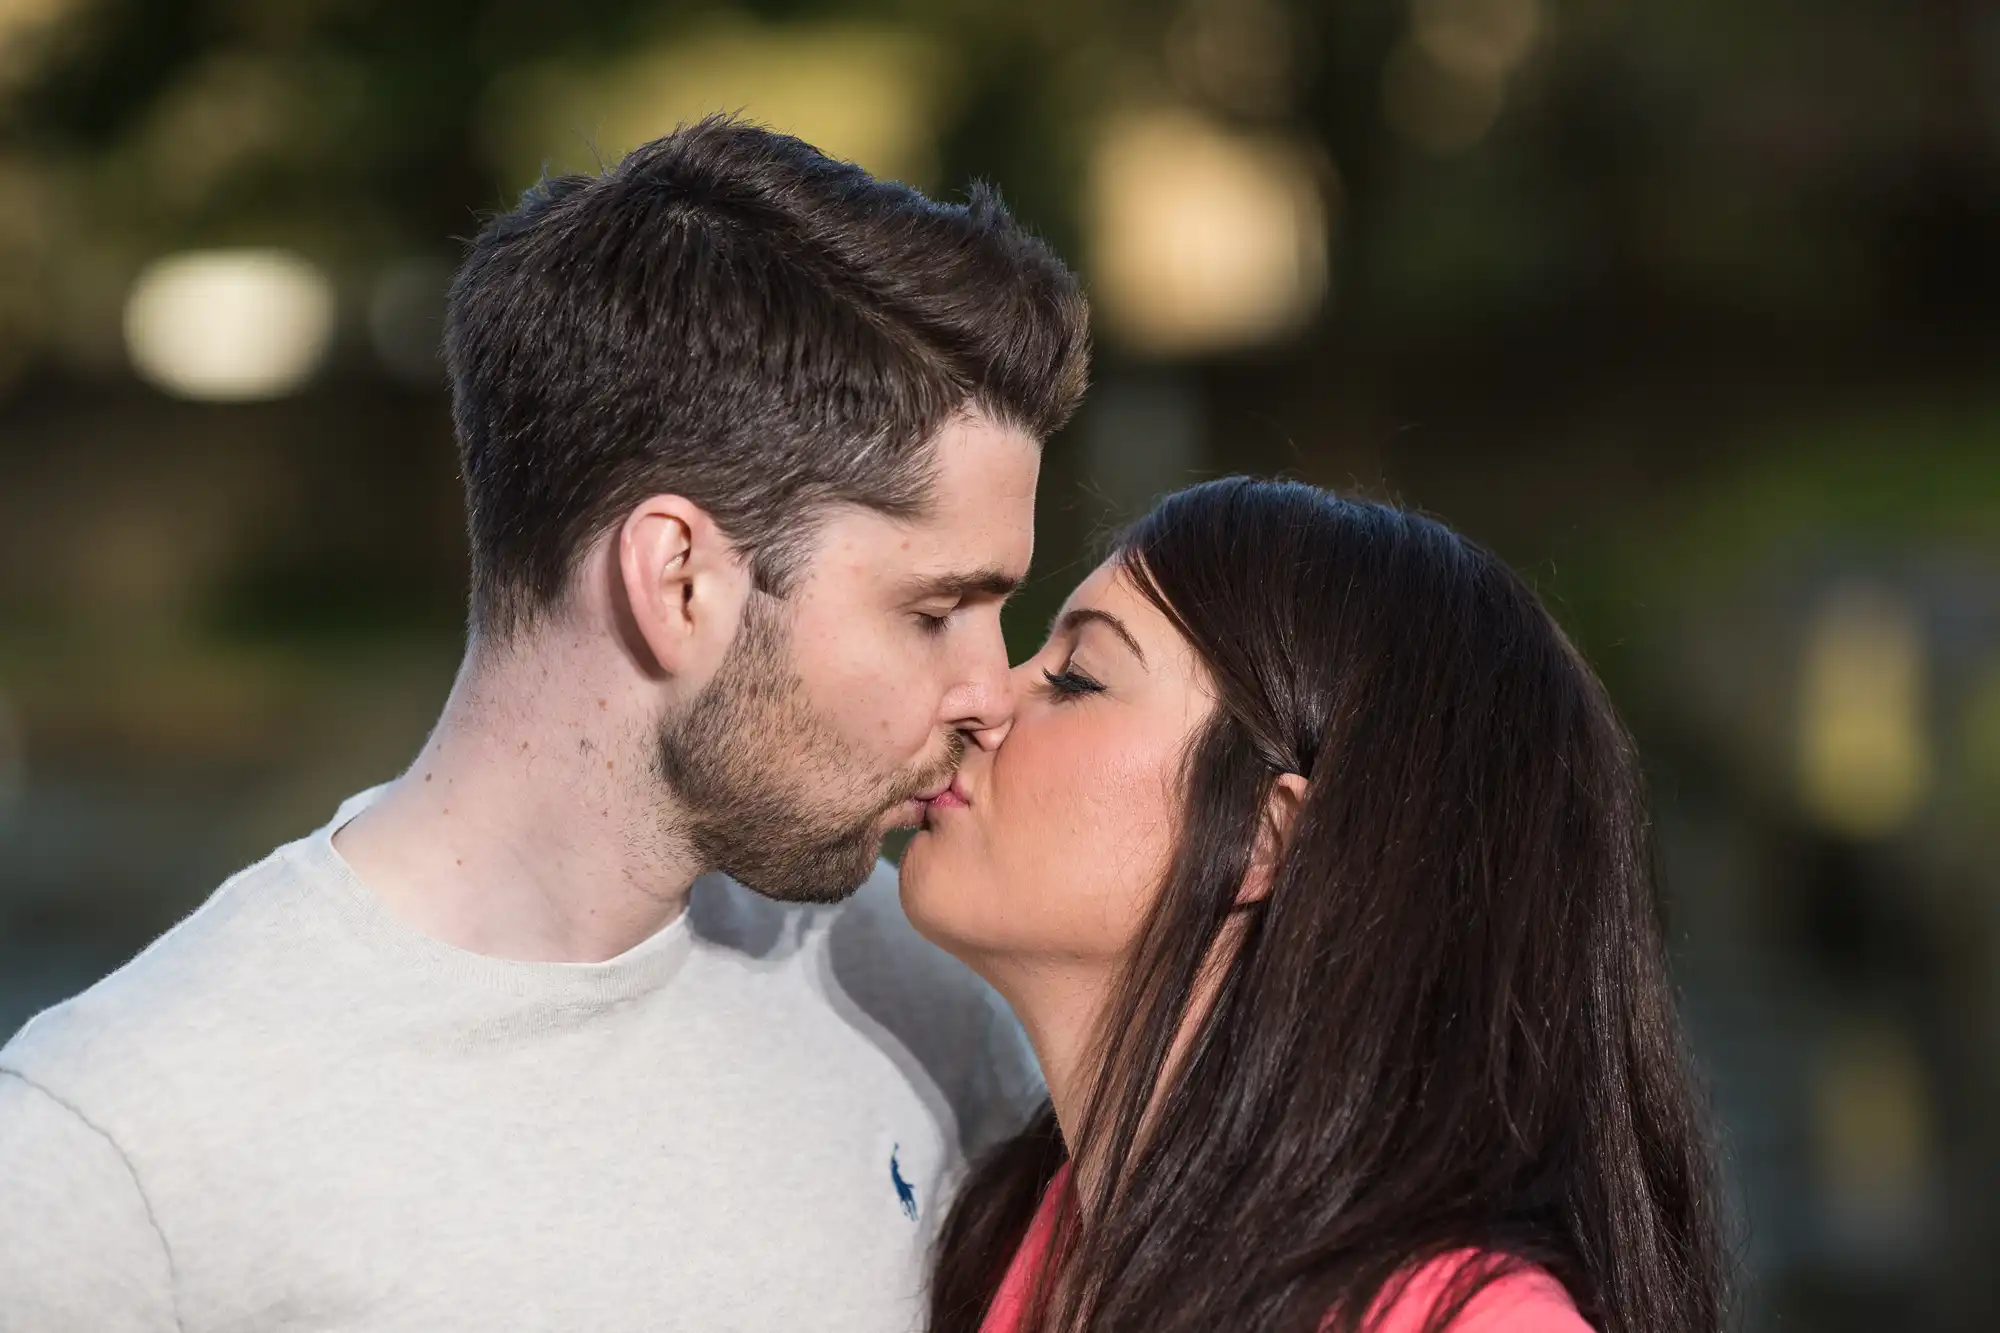 A man and a woman kissing each other on the lips in a park, with trees blurred in the background.